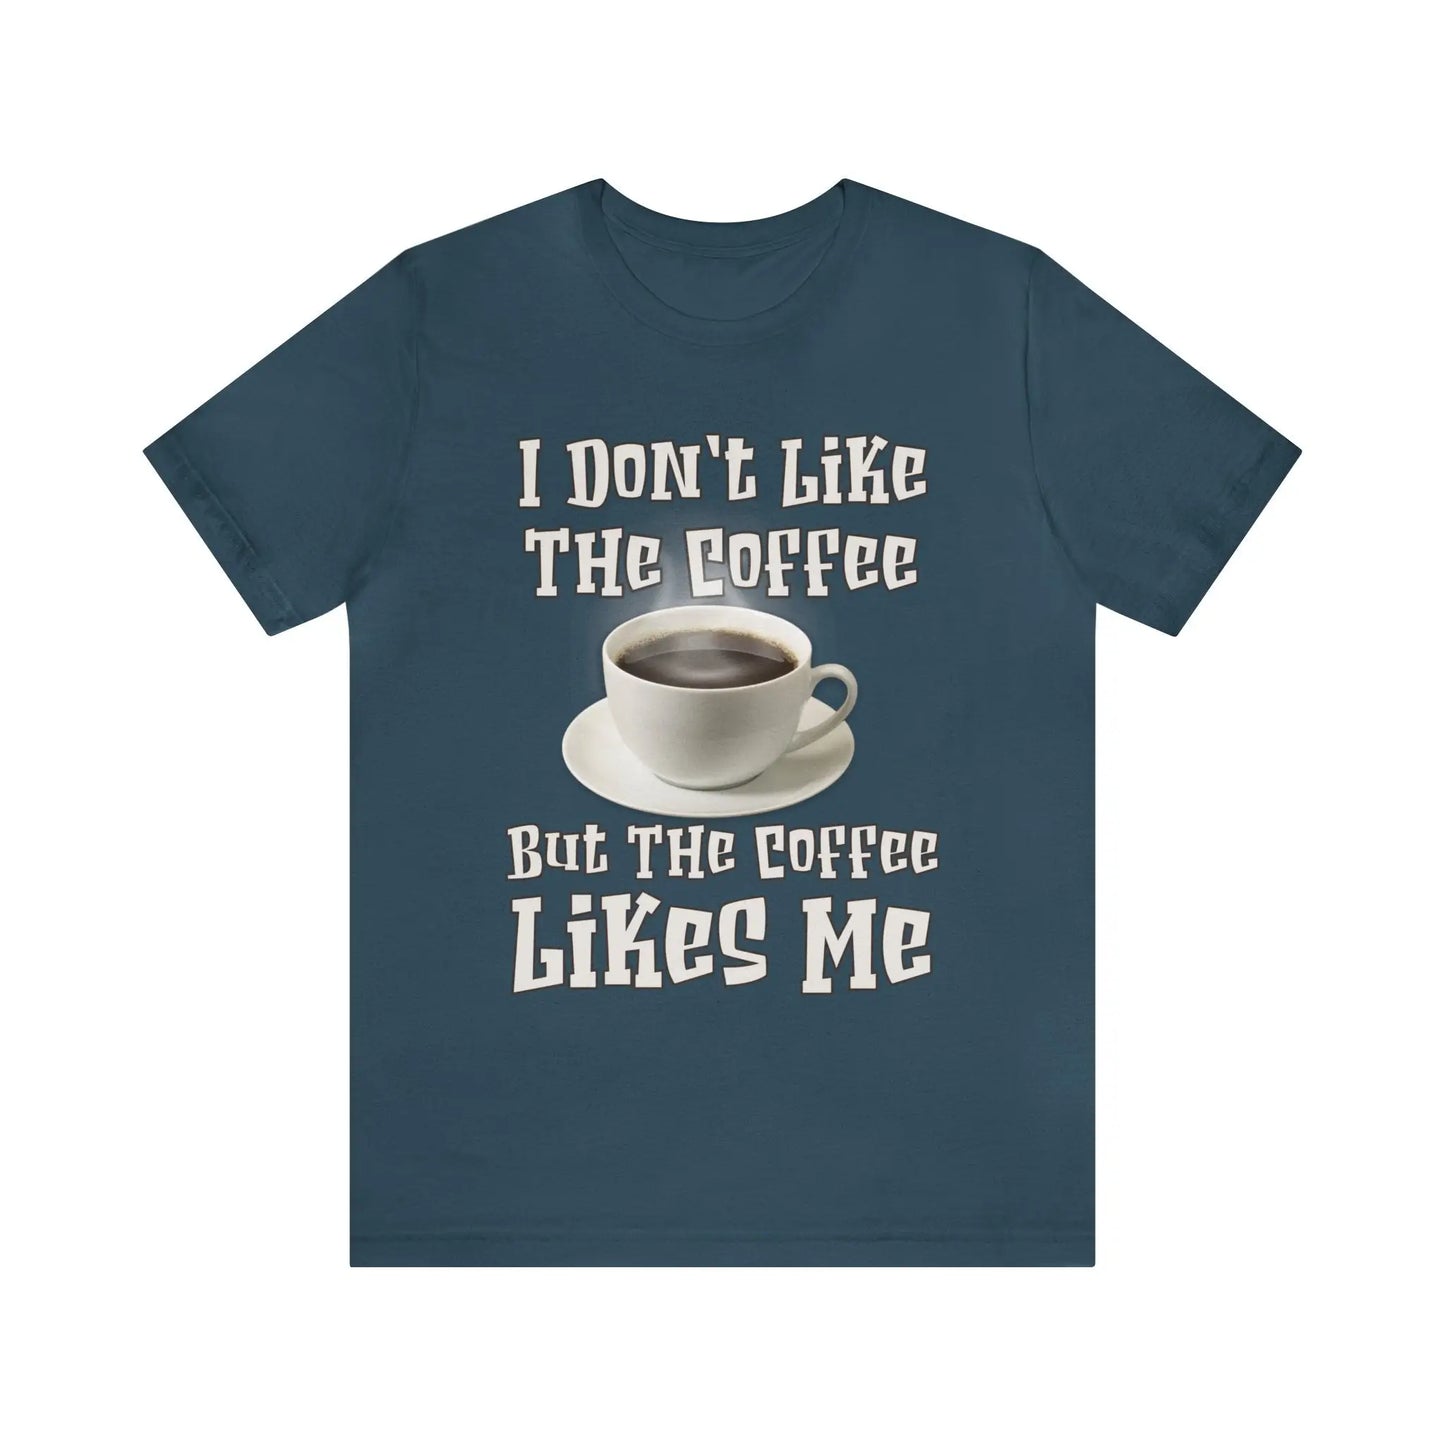 I Don't Like The Coffee Men's Short Sleeve Tee - Wicked Tees